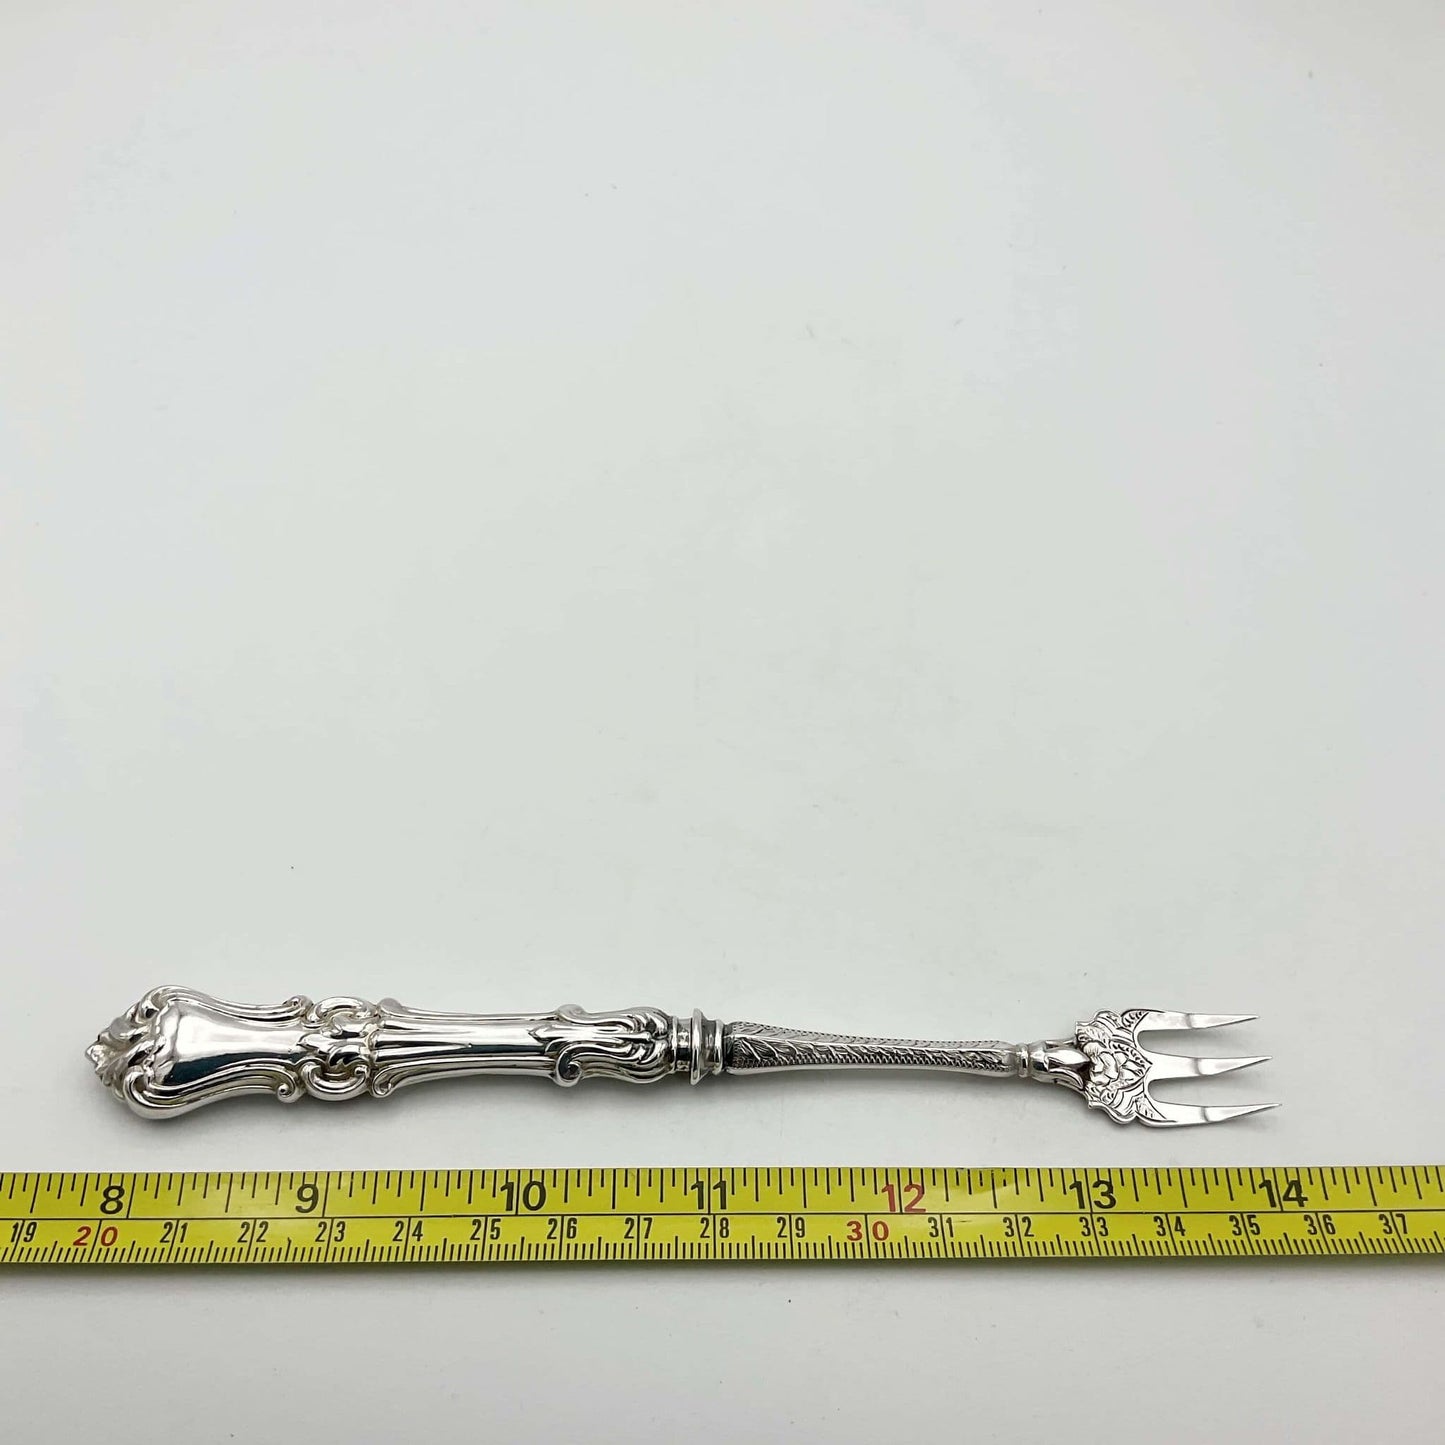 Antique Pickle fork next to tape measure showing it to be 16.5cm in length